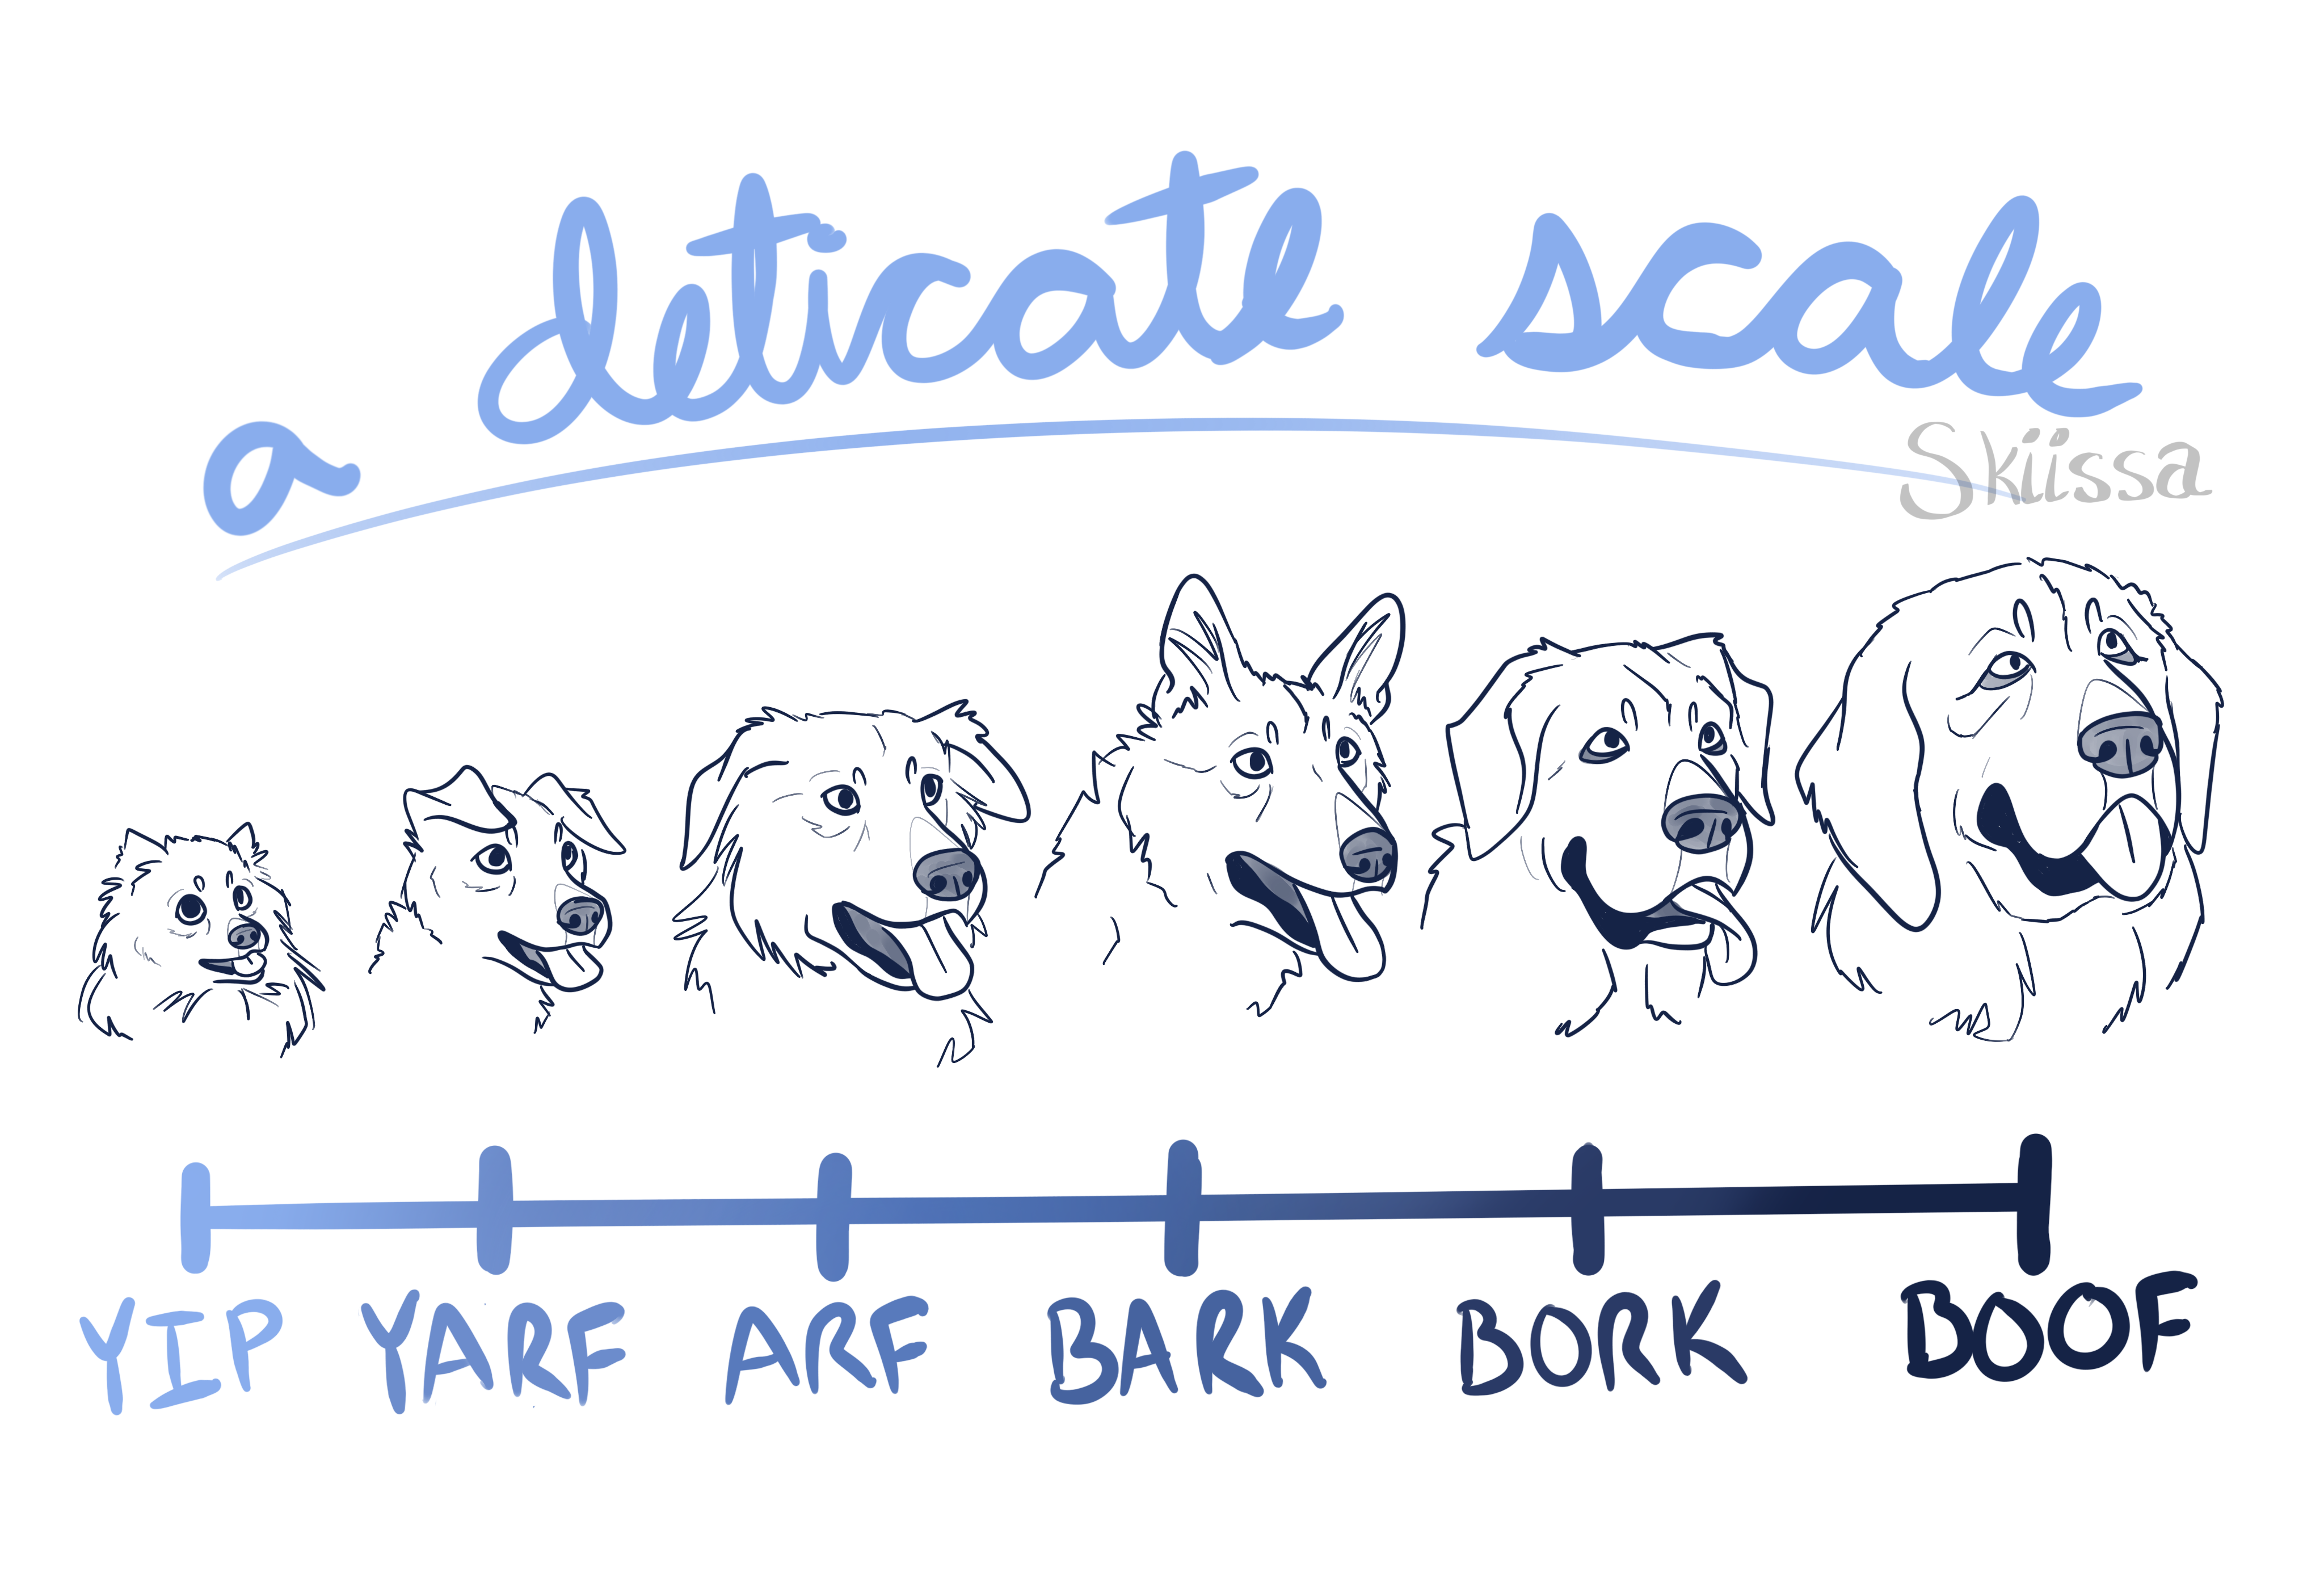 A Delicate Scale by Skiissa on DeviantArt